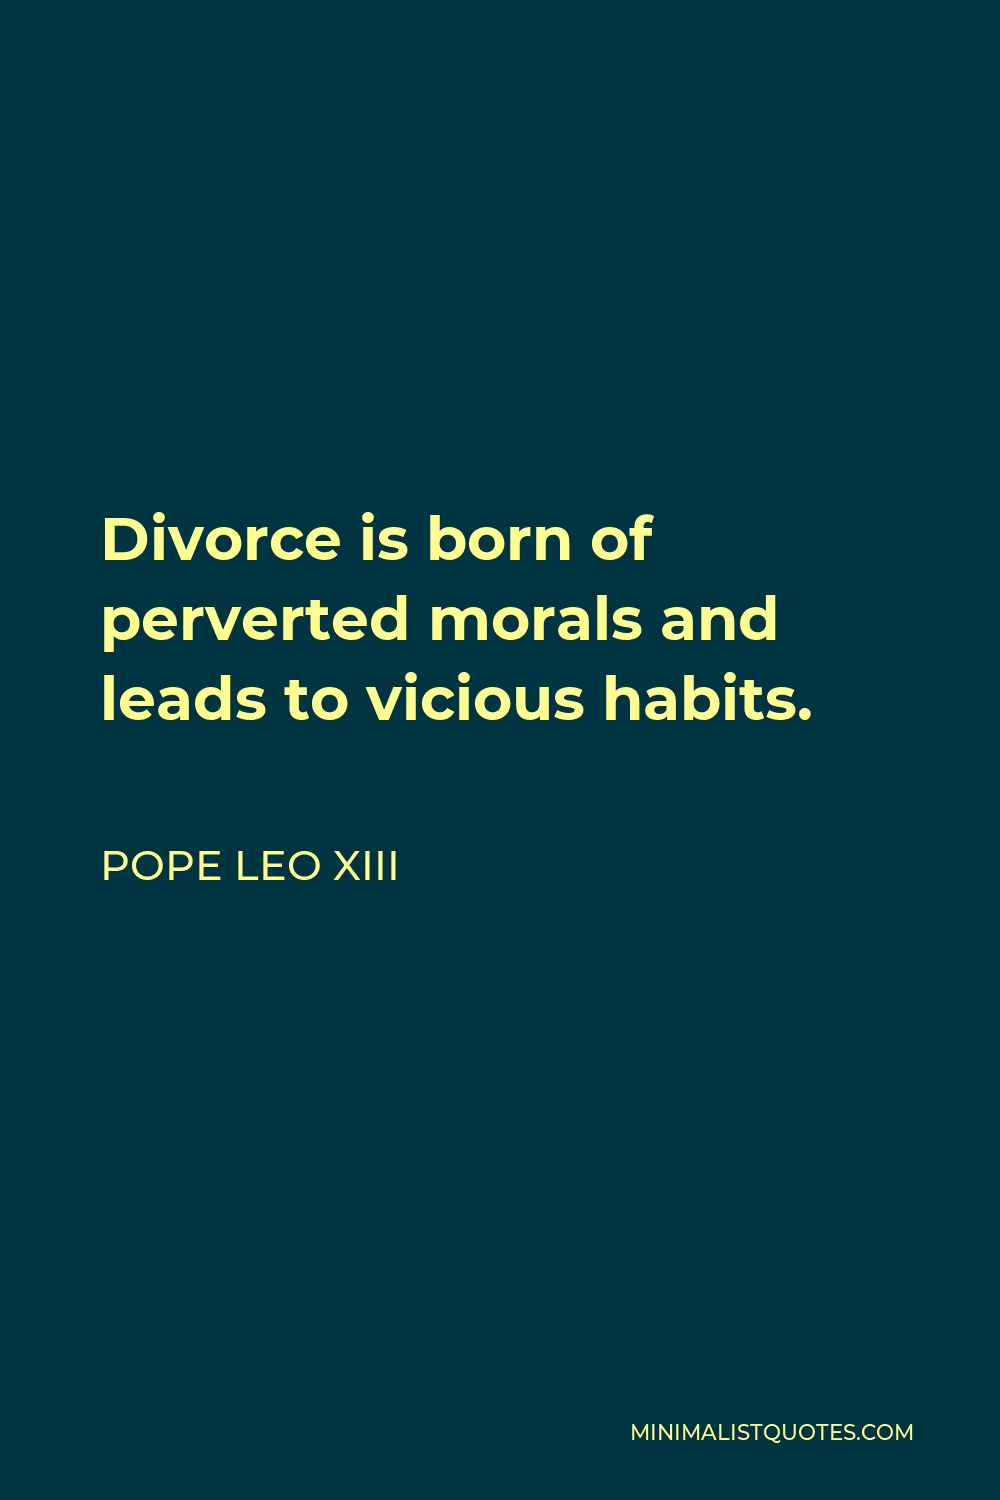 Pope Leo XIII Quote - Divorce is born of perverted morals and leads to vicious habits.